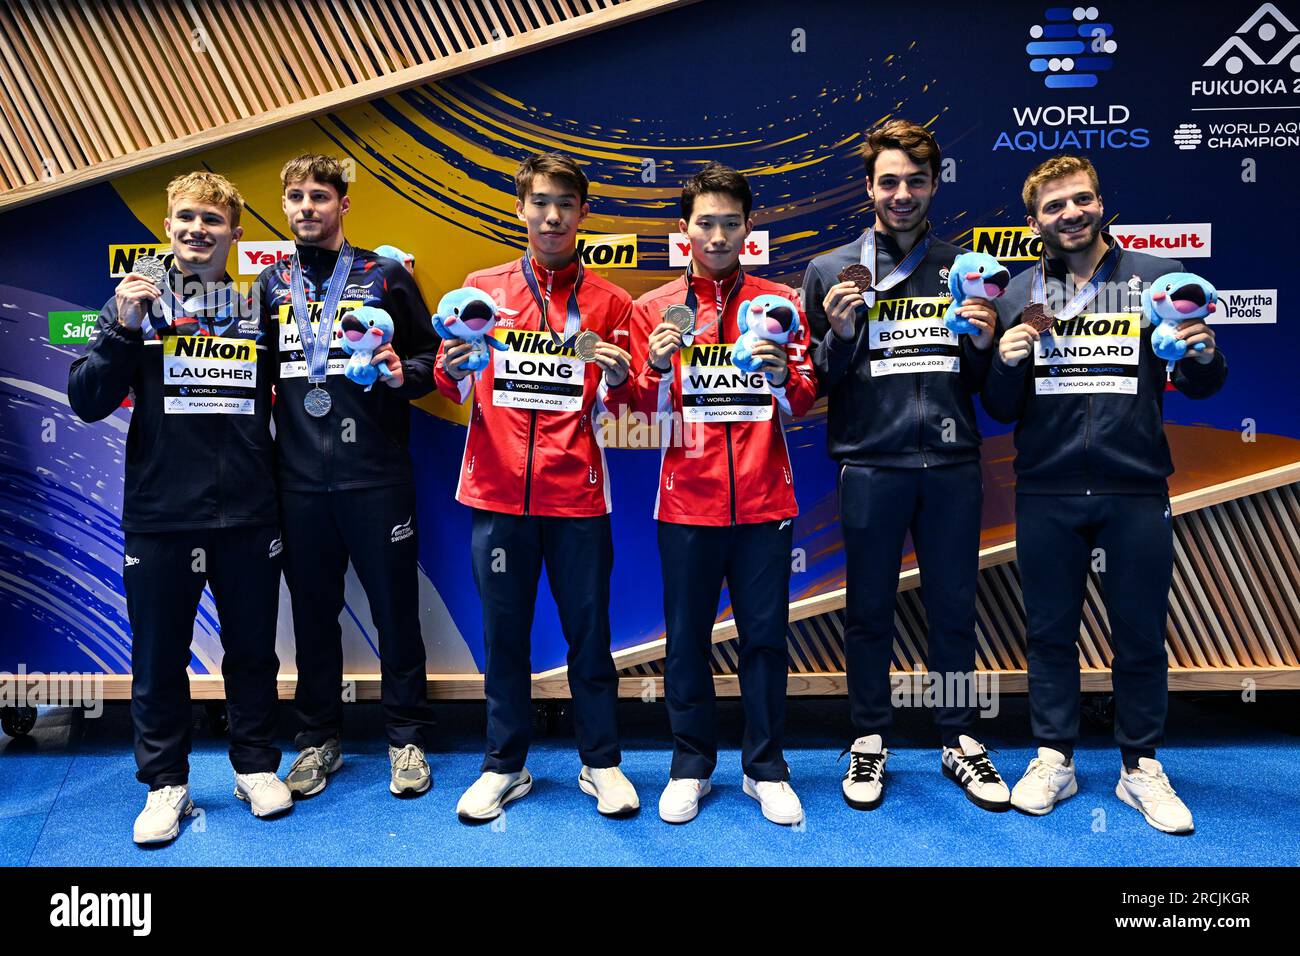 Fukuoka, Japan. 15th July, 2023. Jack Laugher/Anthony Harding of Britain, Long Daoyi/Wang Zongyuan of China and Jules Bouyer/Alexis Jandard of France (from L to R) pose during the medal ceremony after the men's synchronised 3m springboard final of World Aquatics Championships 2023 in Fukuoka, Japan, July 15, 2023. Credit: Zhang Xiaoyu/Xinhua/Alamy Live News Stock Photo